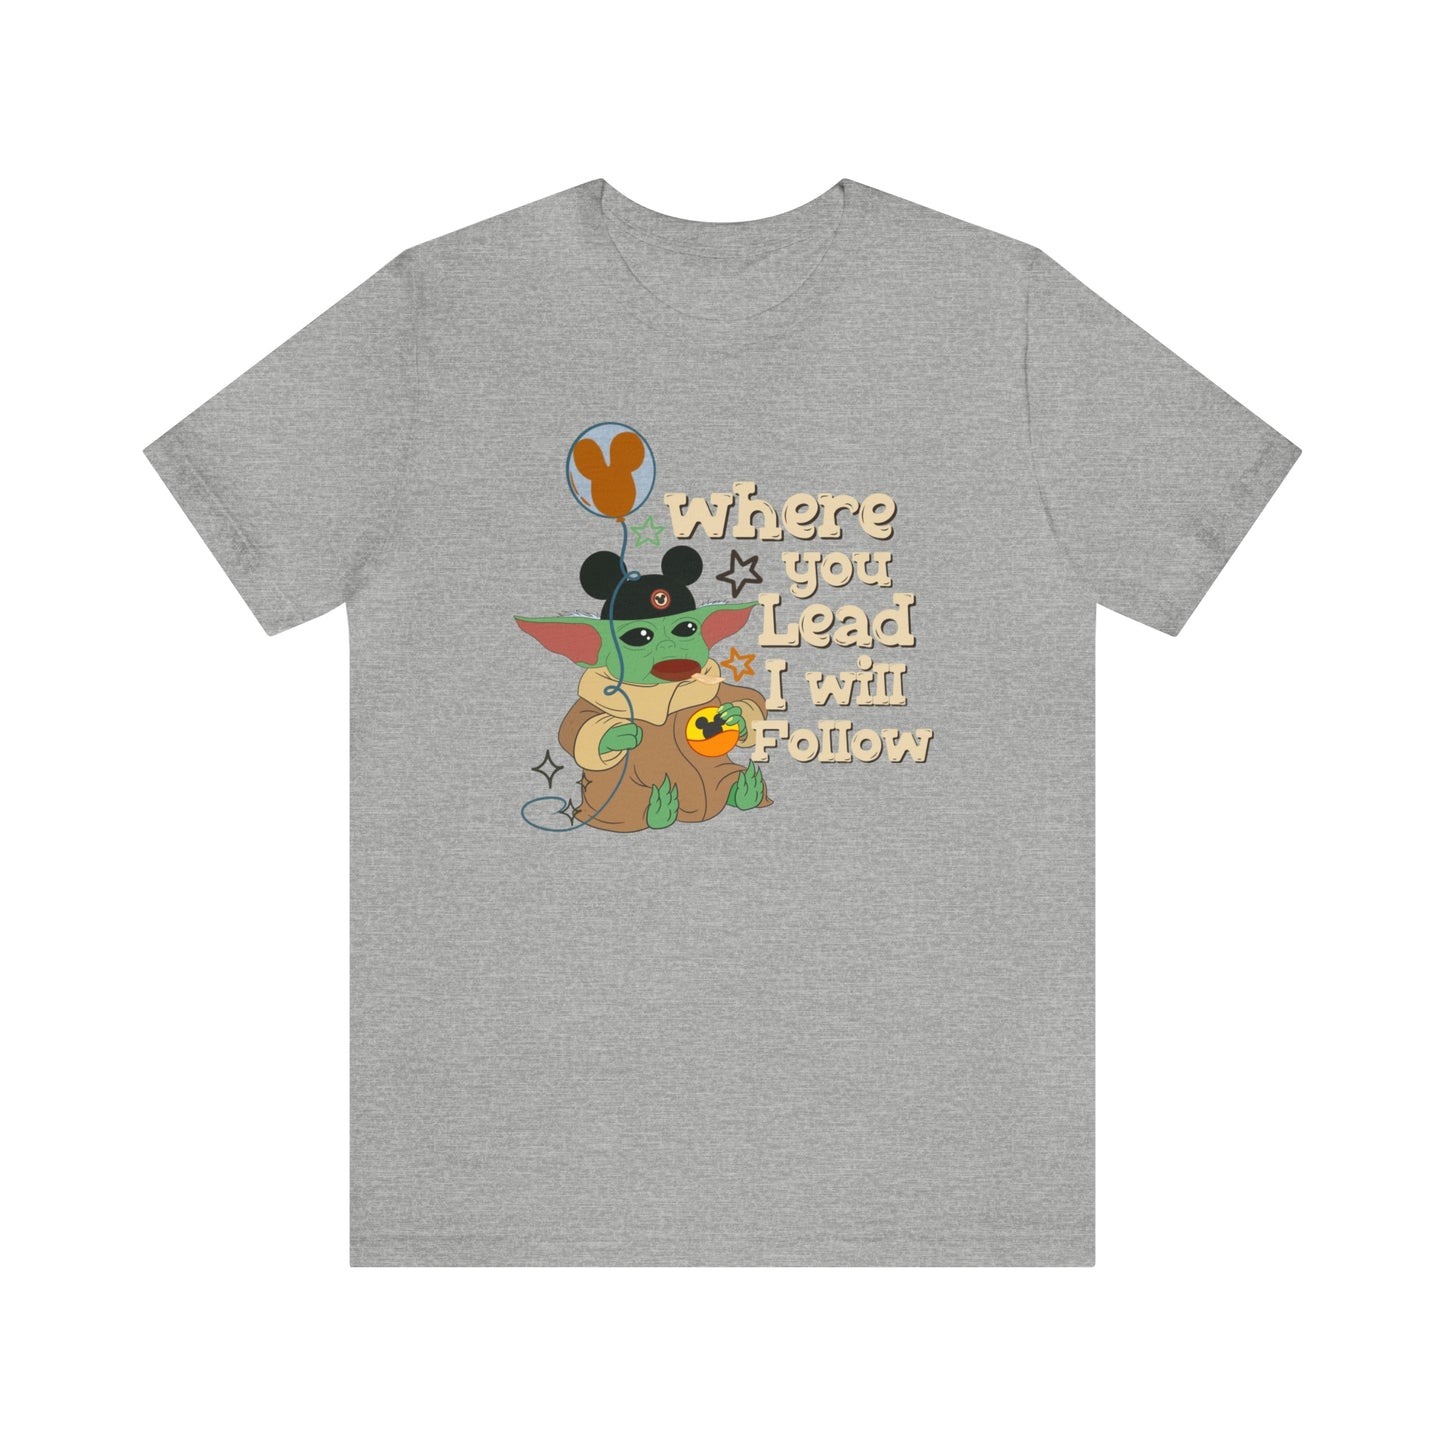 Where You Lead, I Will Follow Adult Unisex Tee